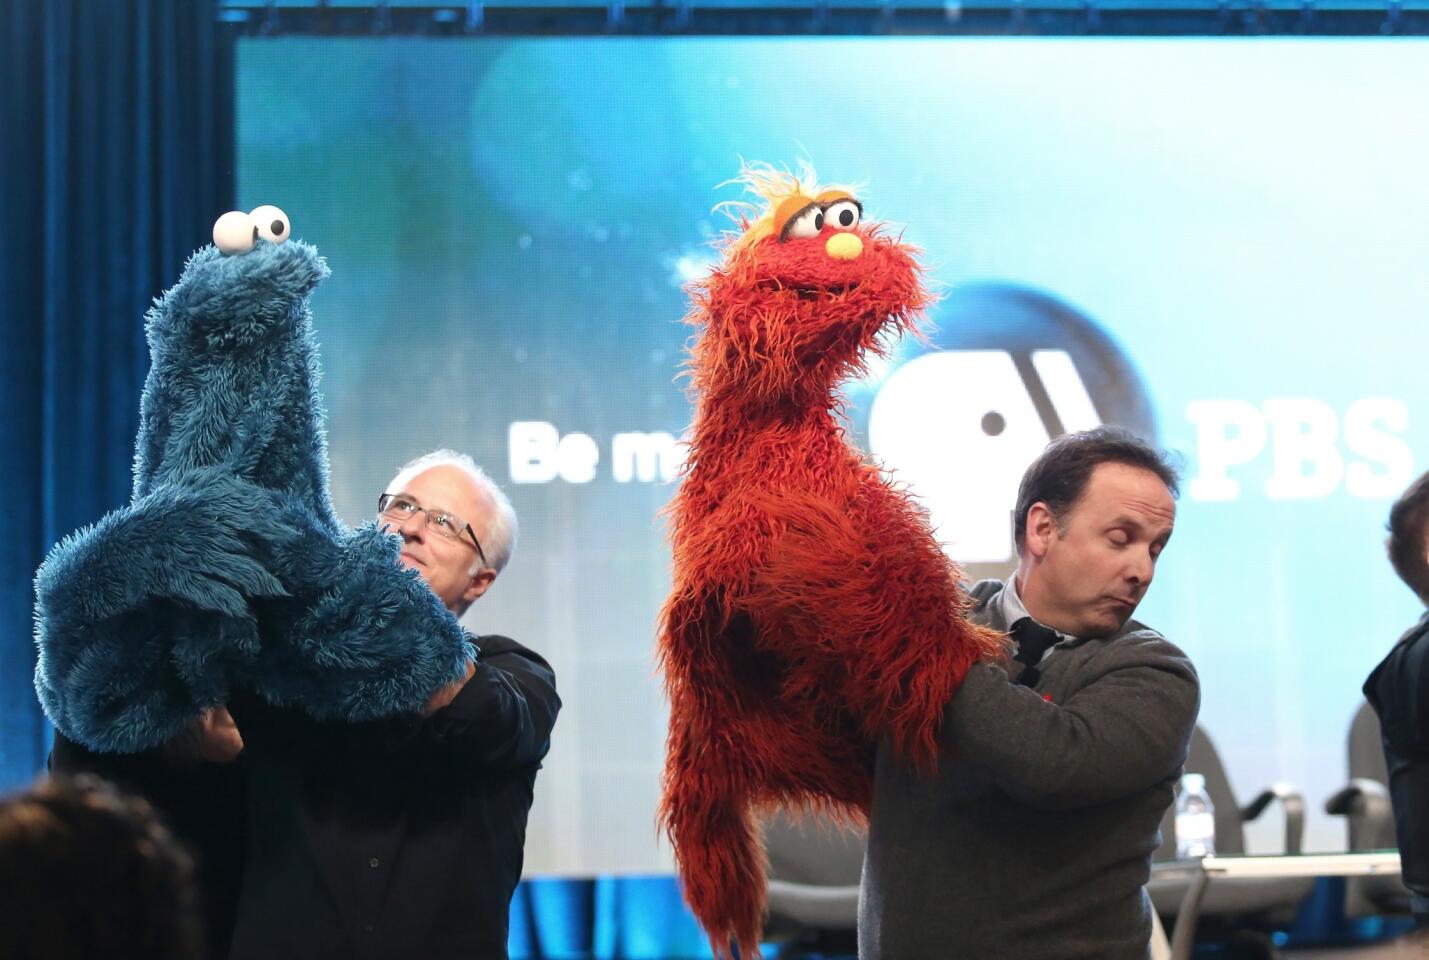 Actor-puppeteer David Rudman, left, and actor-puppeteer Joey Mazzrino during the "PBS Kids Update/Sesame Street 45th Season Anniversary" panel discussion.